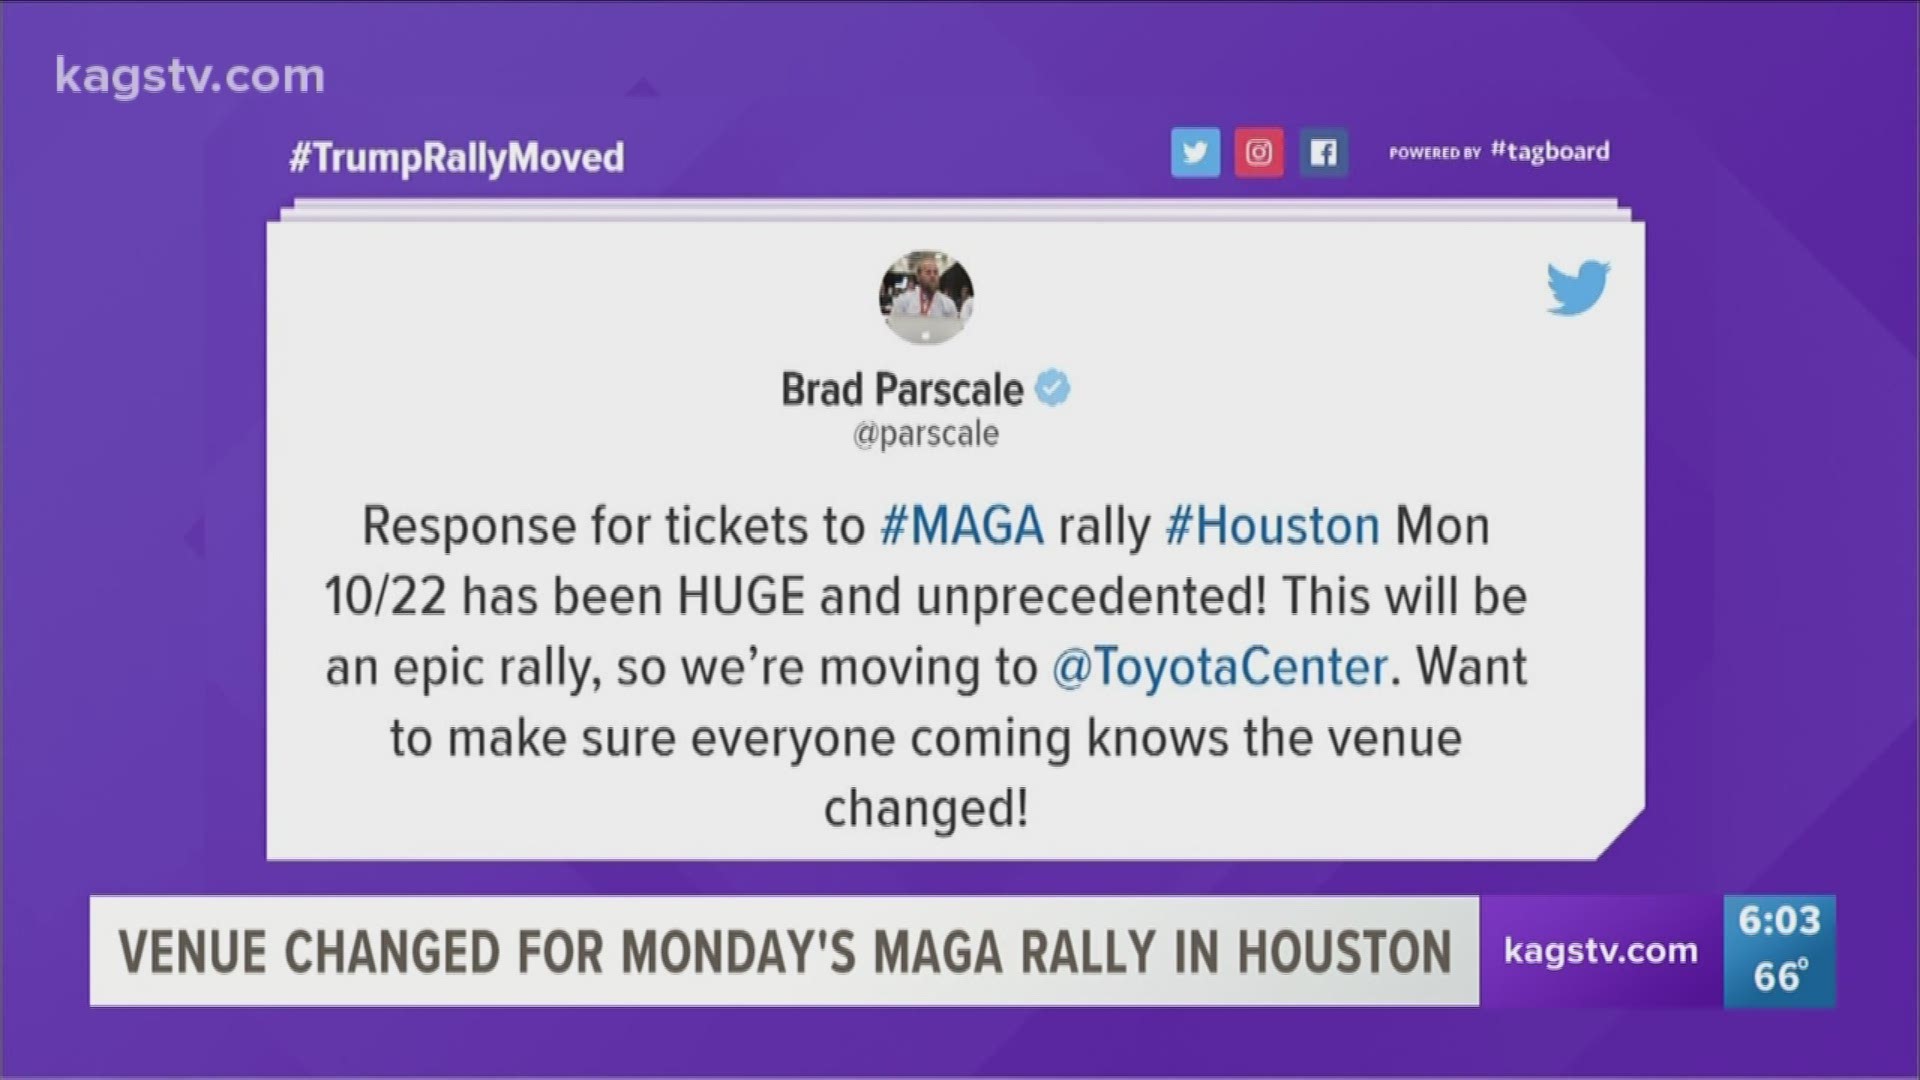 A new venue announced today for President Trump's Make America Great Rally scheduled for this coming Monday in Houston.